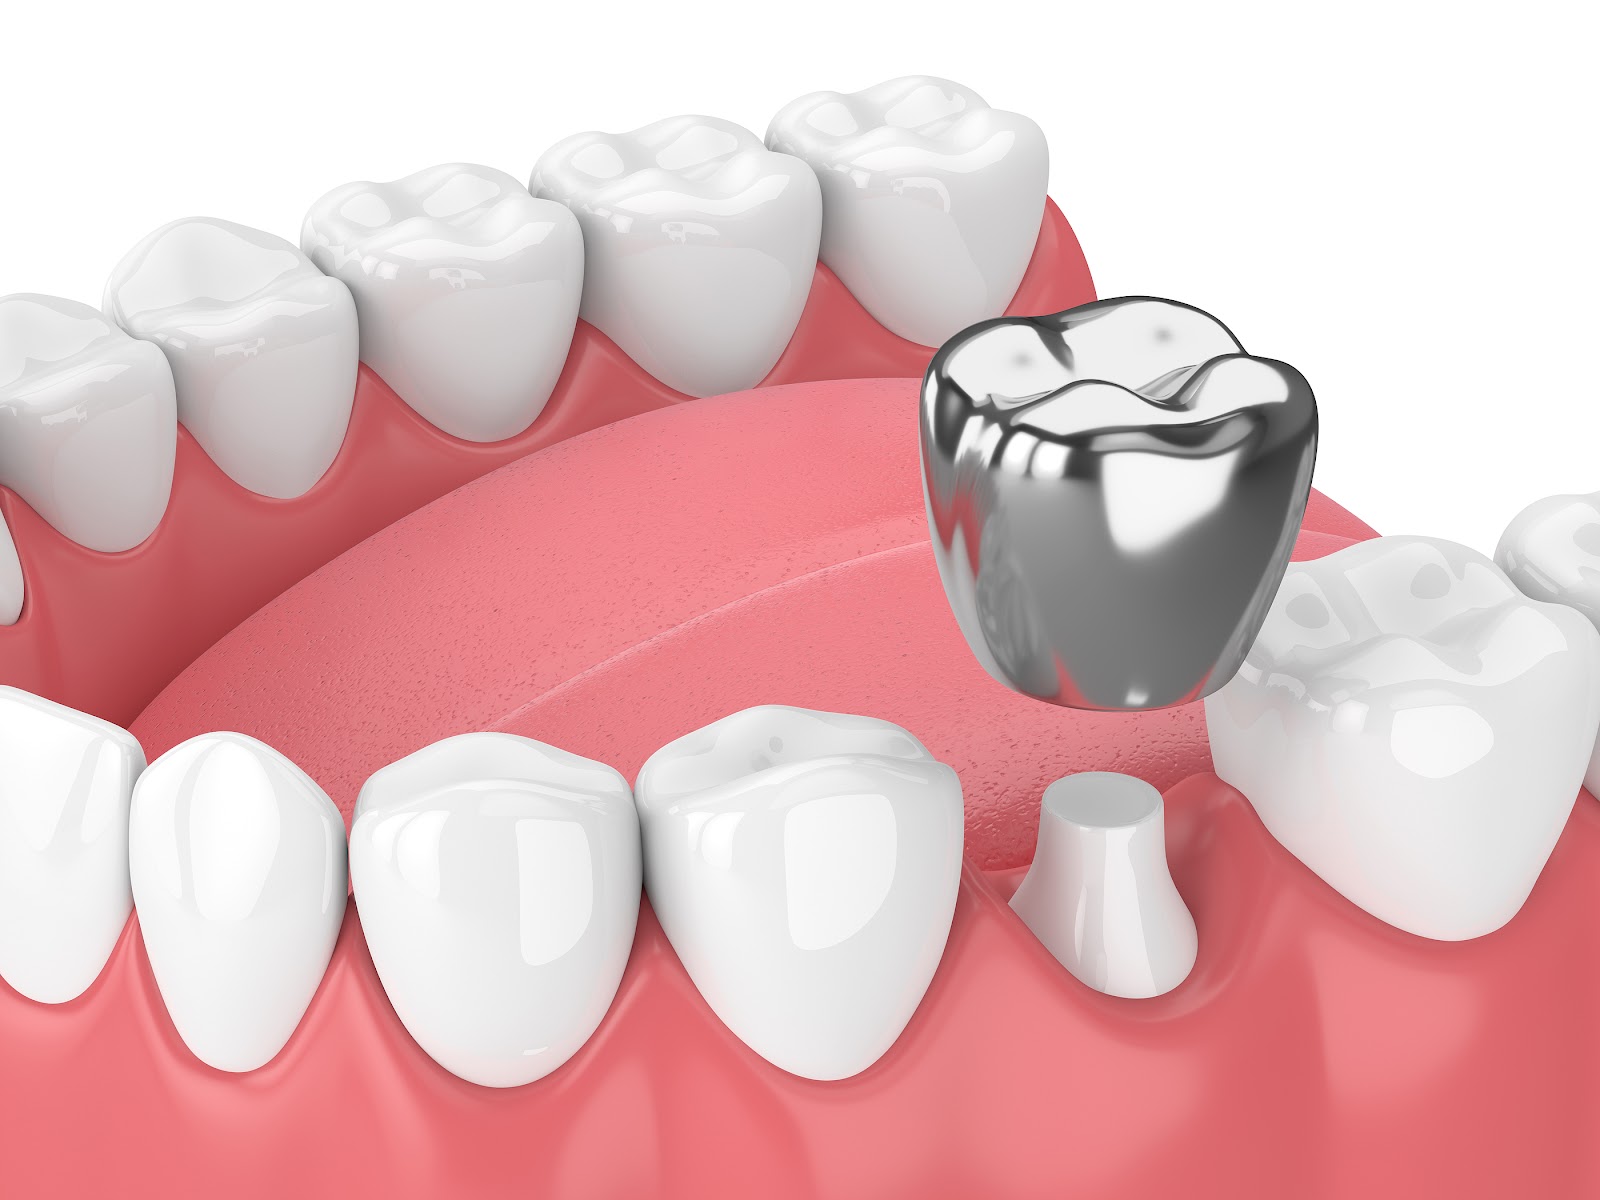 Silver Tooth Crowns | Benefits, Treatment, Side Effects & Cost